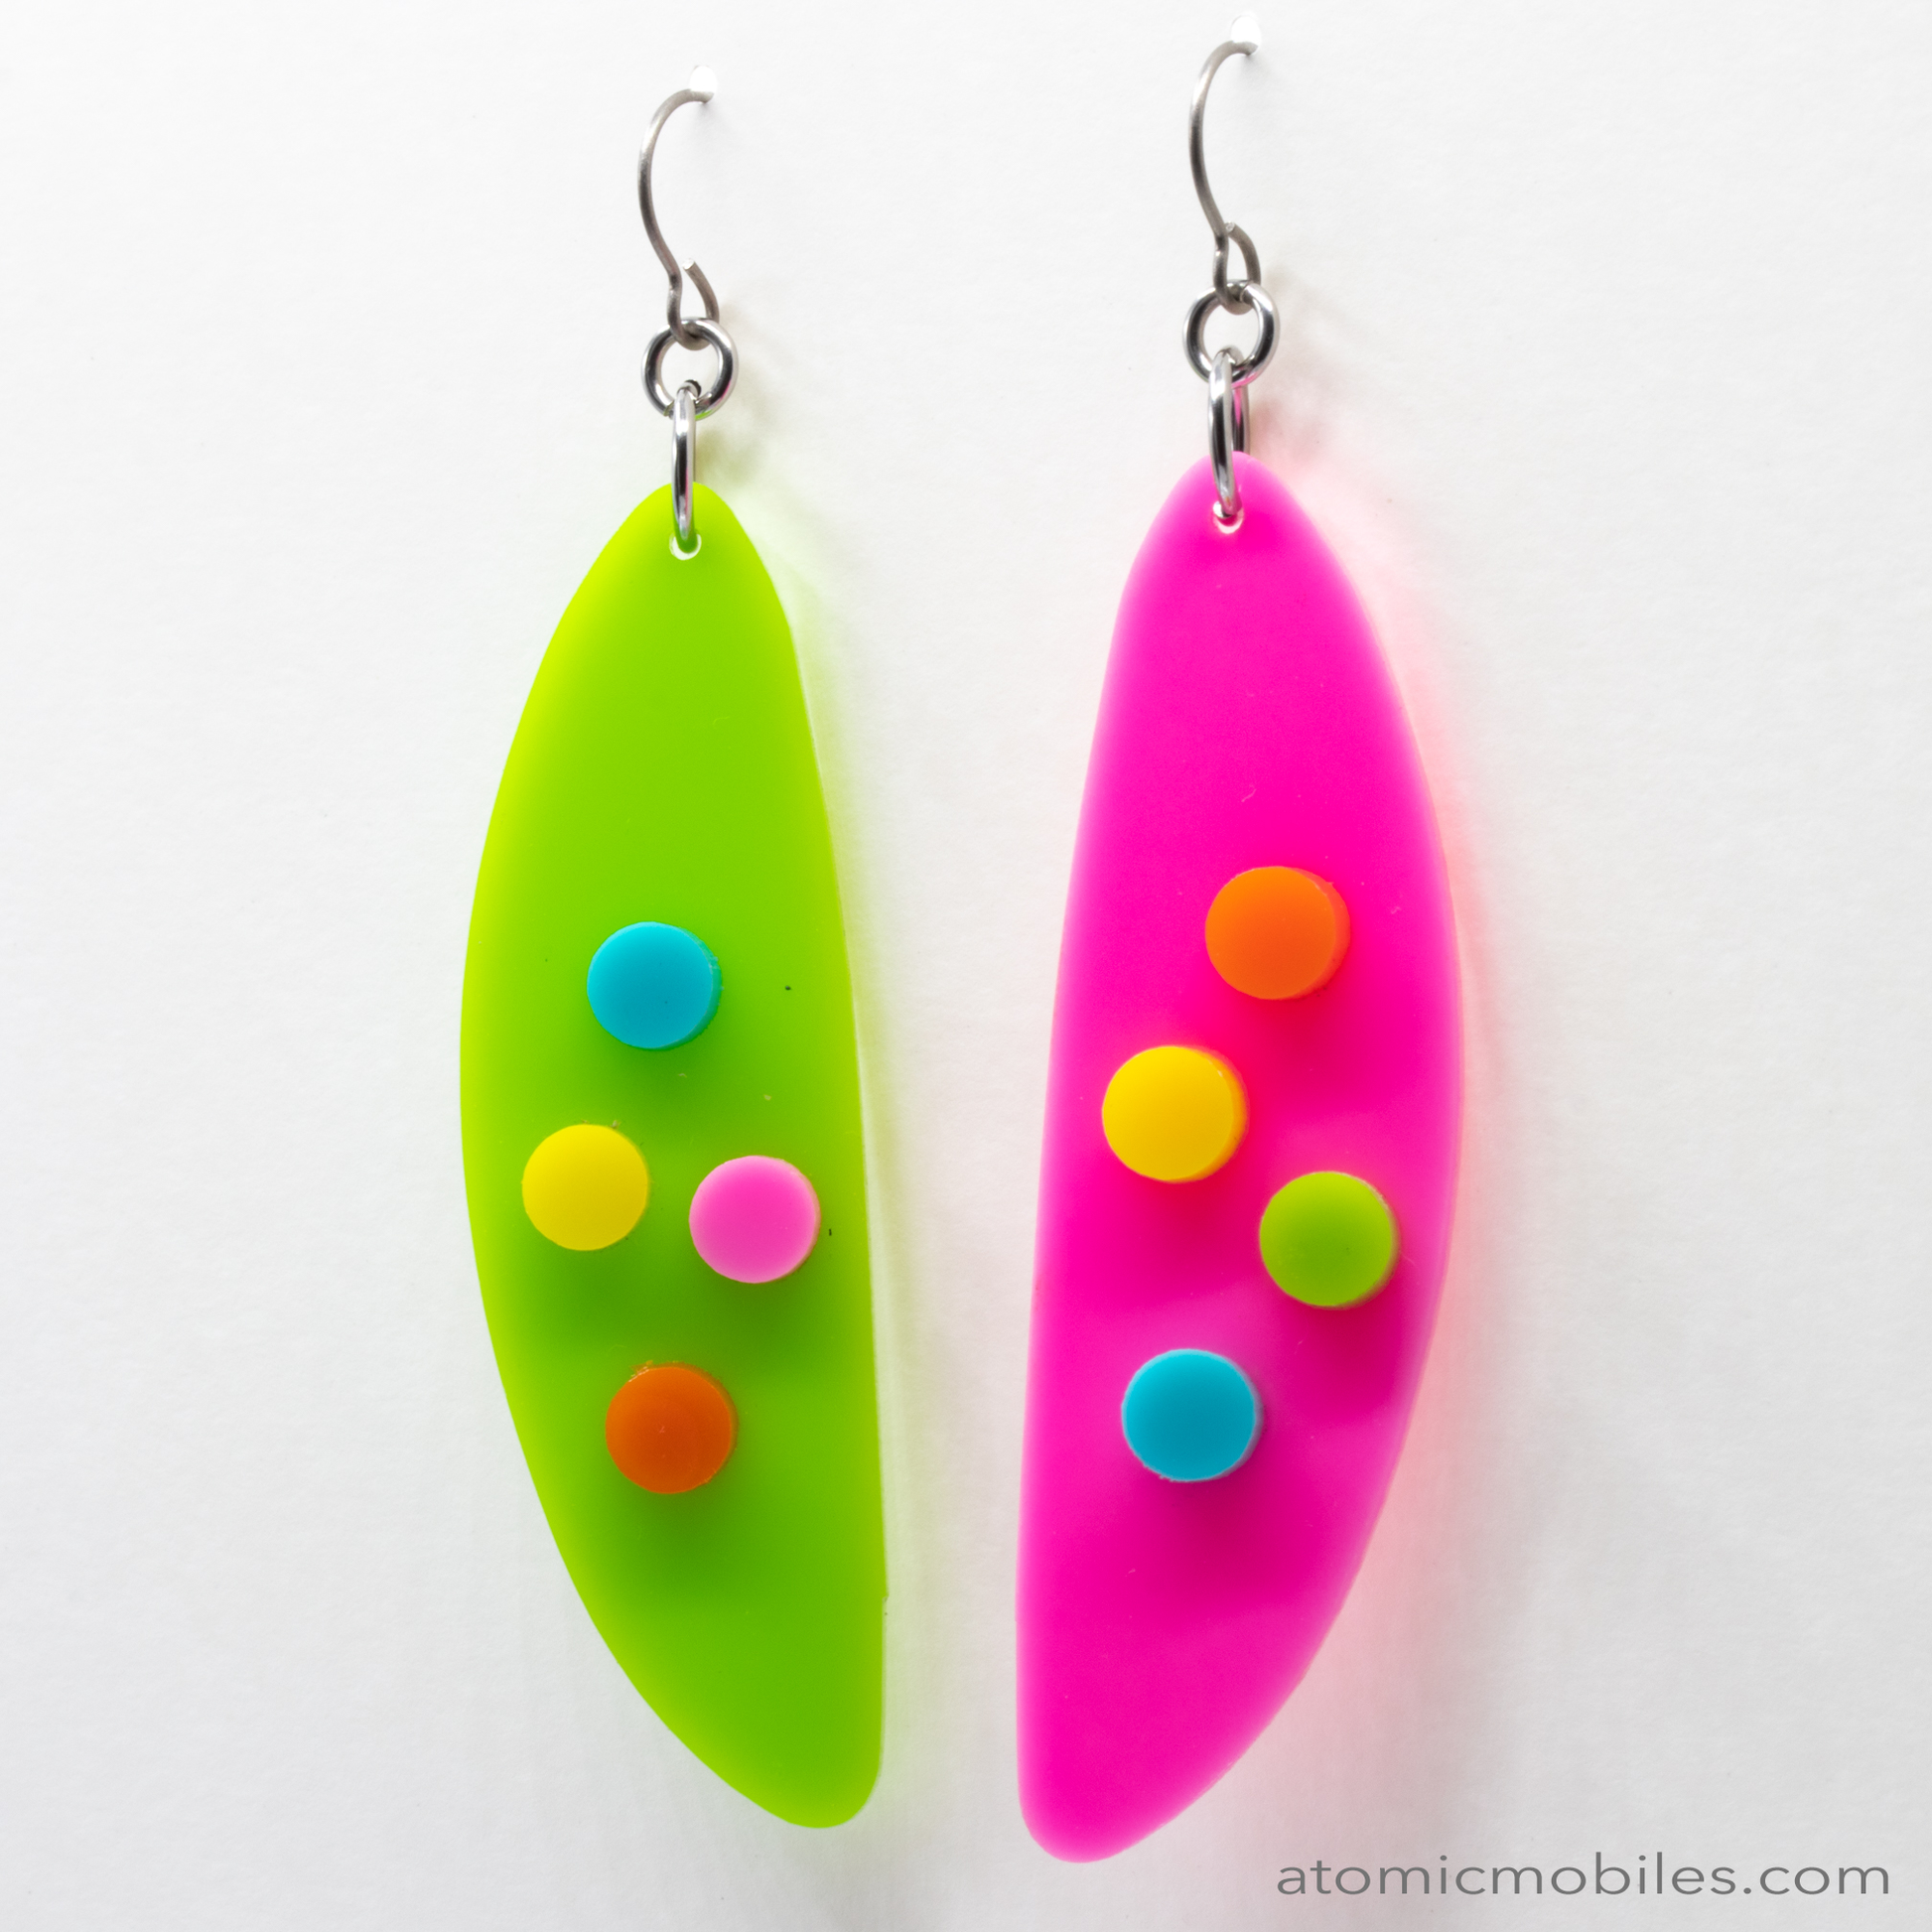 POPdots modern retro statement earrings in Hot Pink and Lime Green with Multi Color Dots acrylic by AtomicMobiles.com